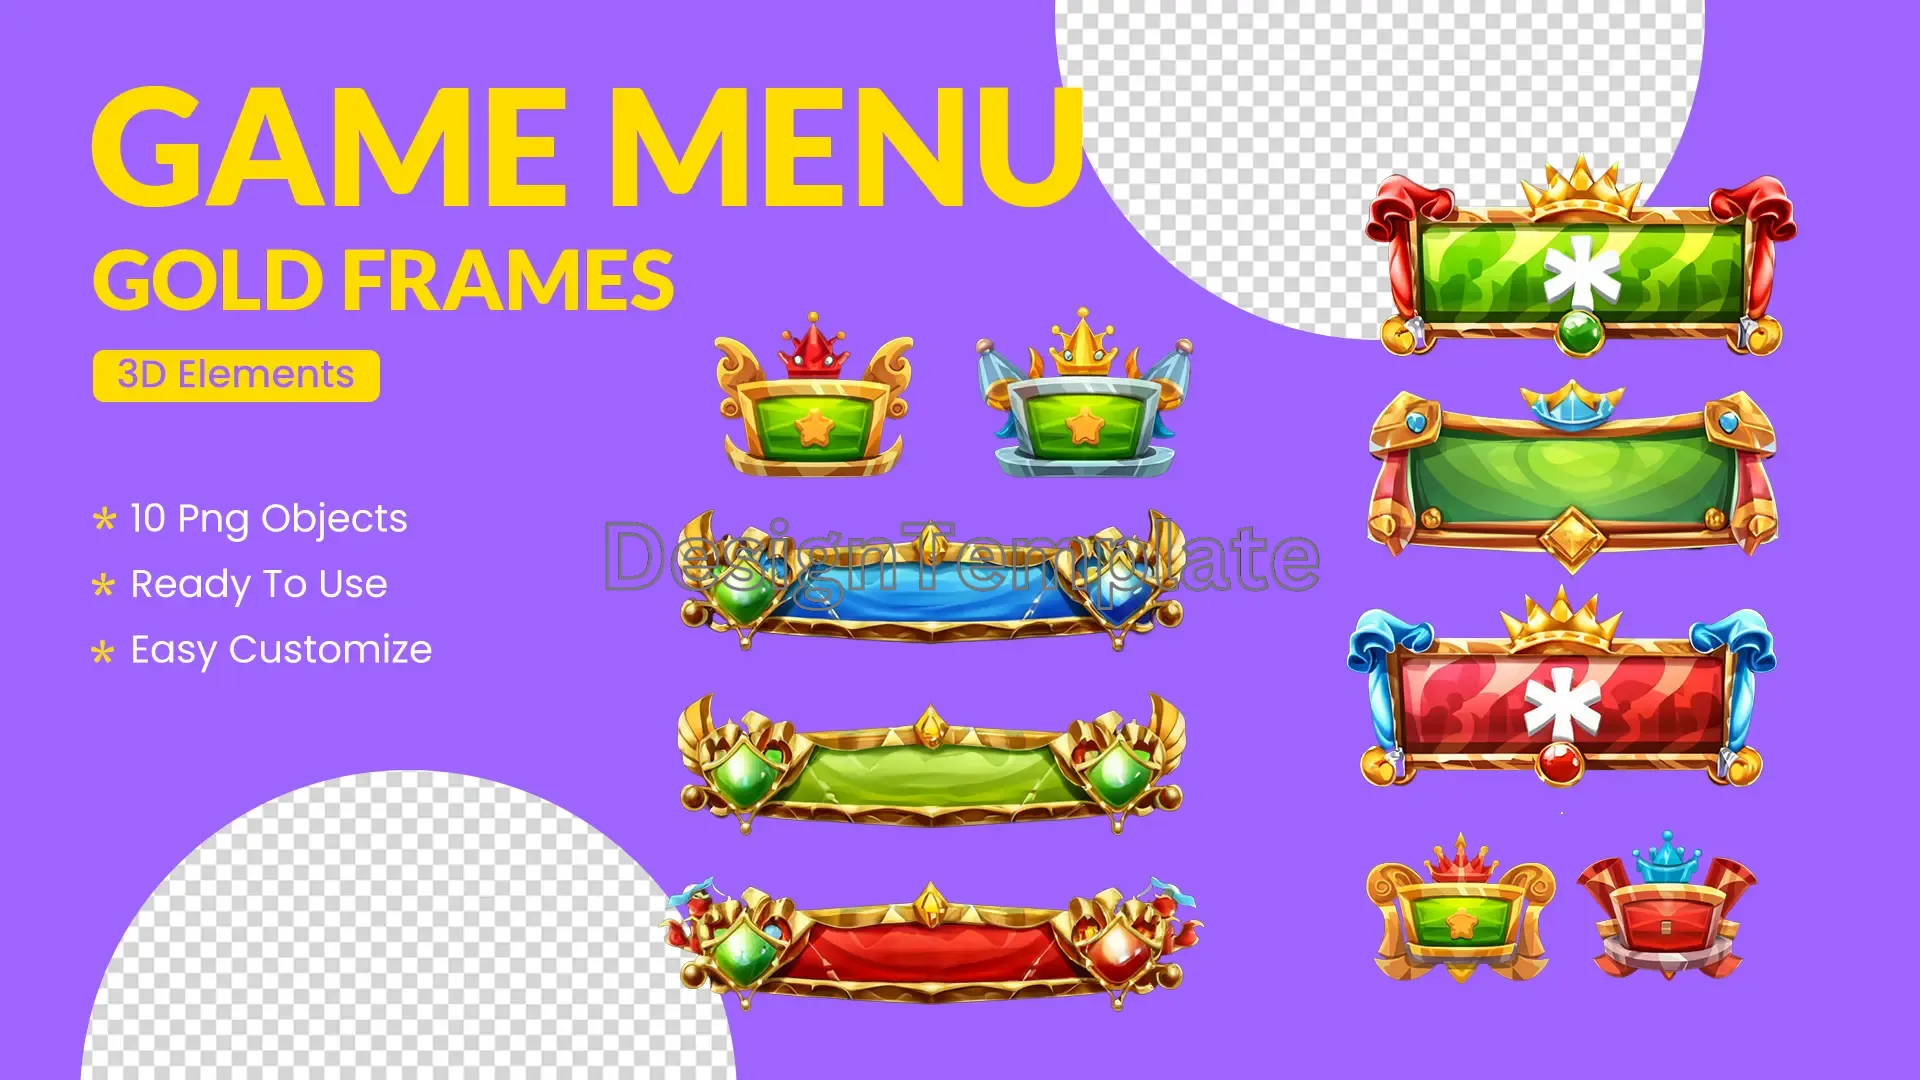 Gilded Frames Luxurious 3D Game Menu Pack image